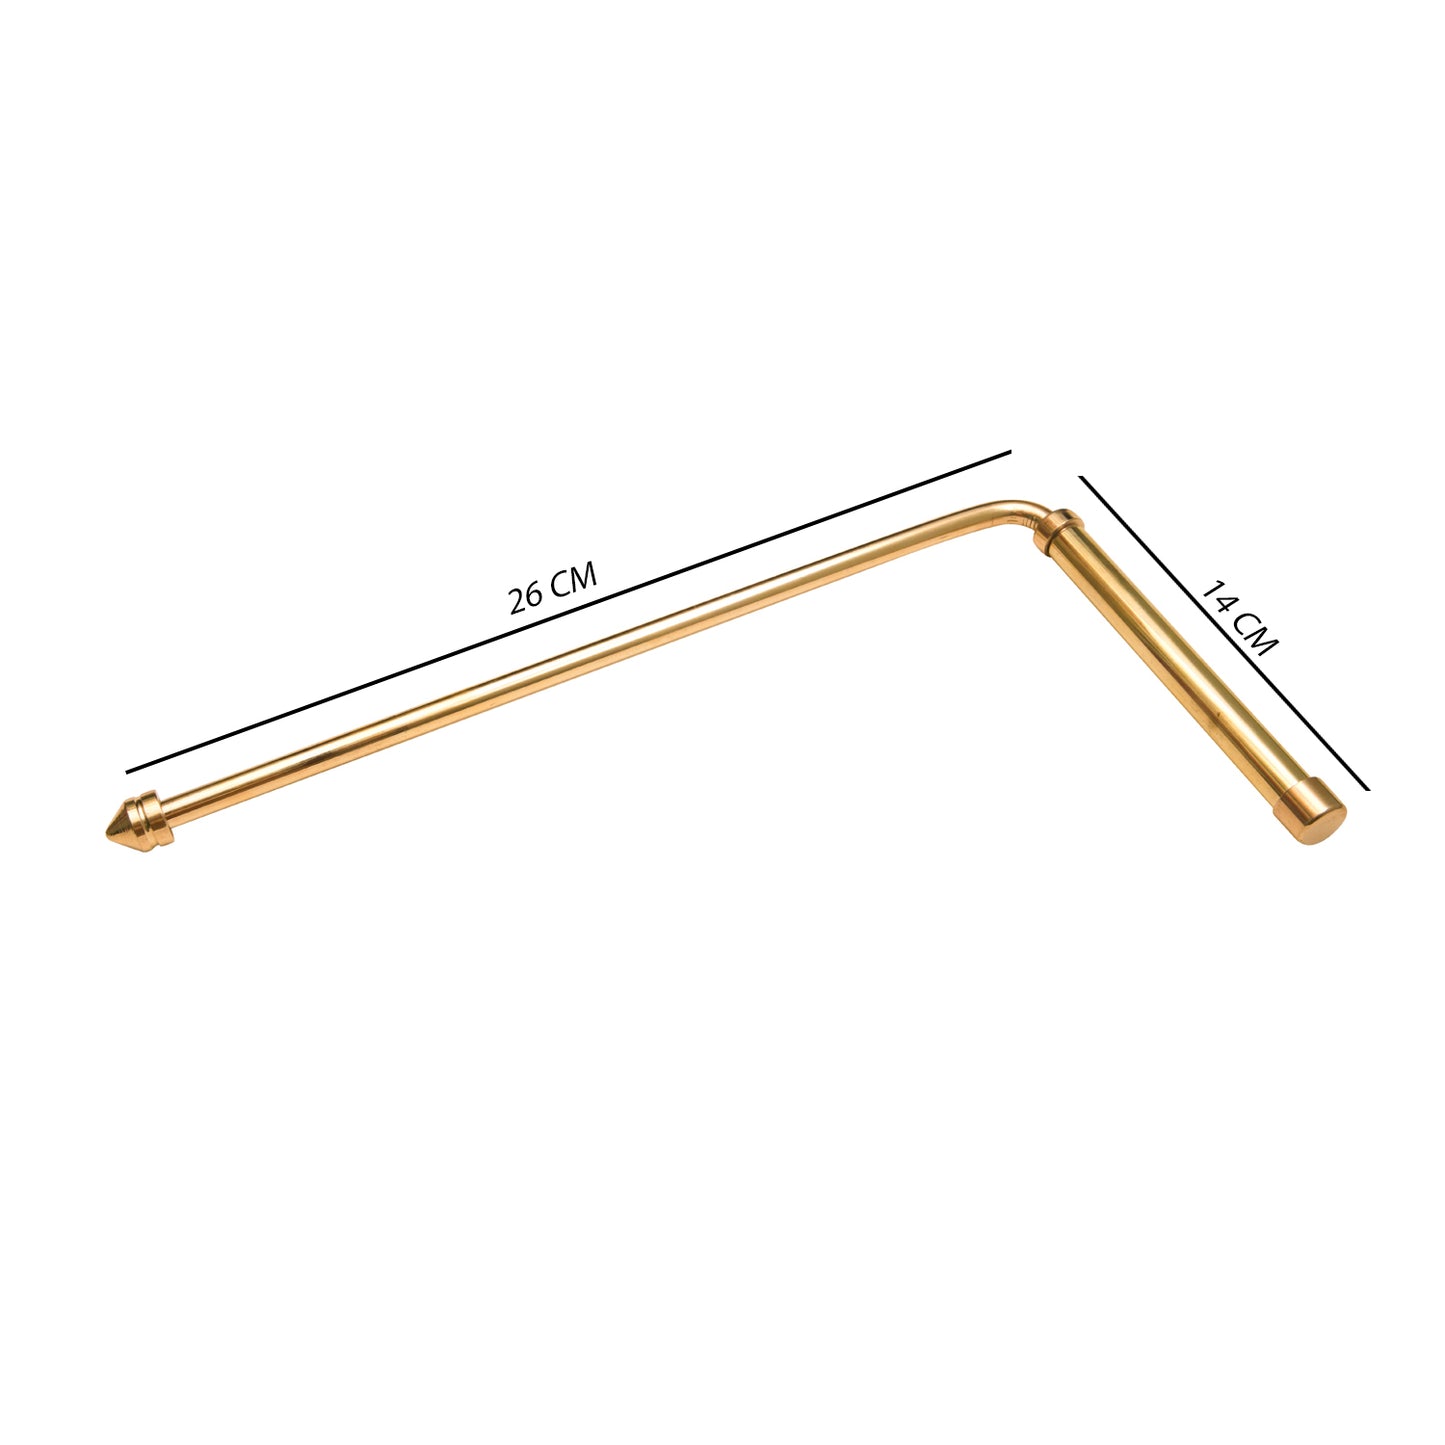 BRASS DOWSING ROD WITH METAL HANDLE.